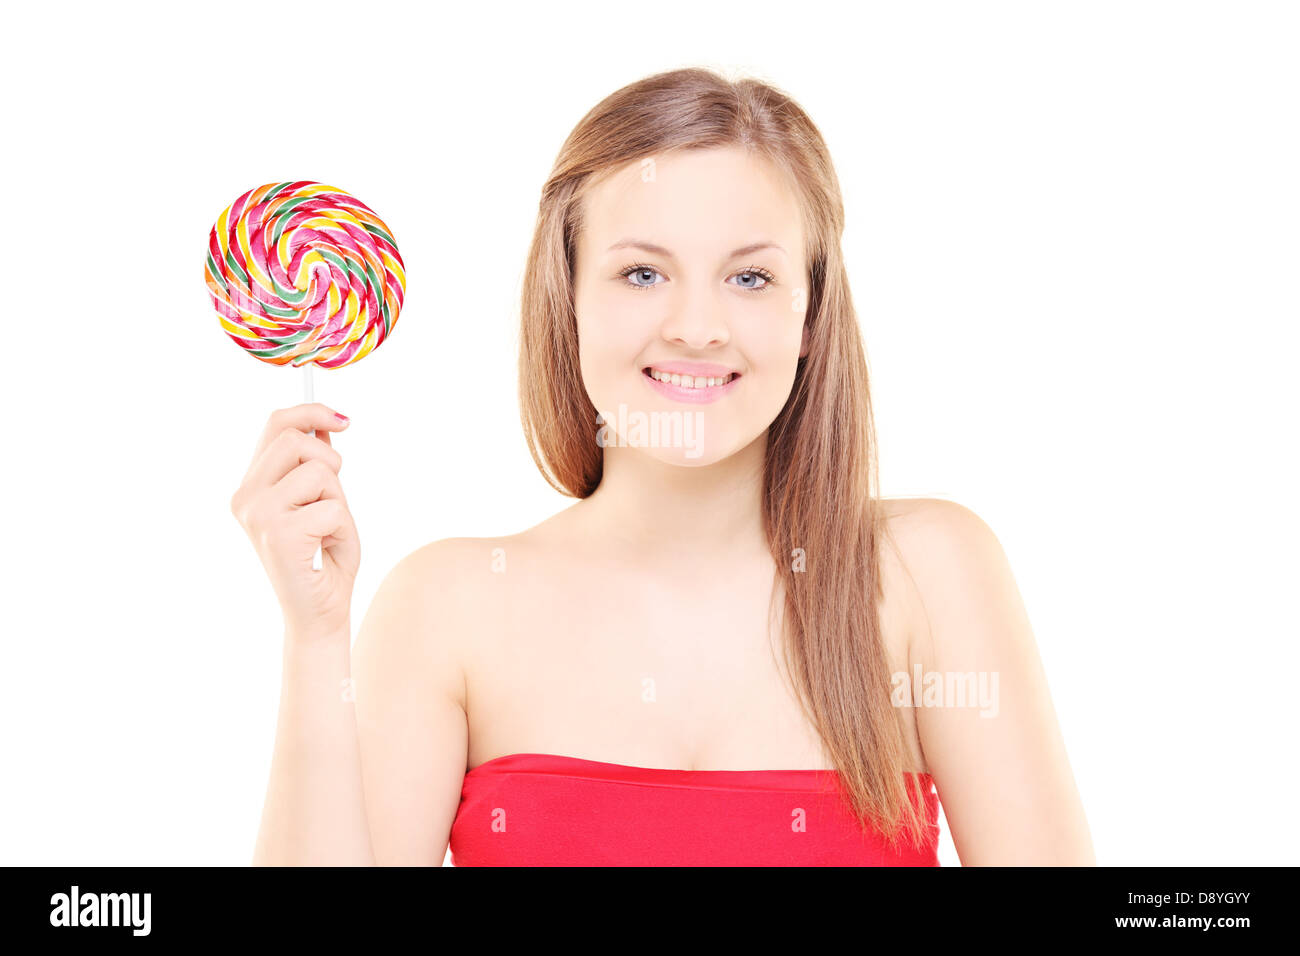 Pretty young girl holding a lollipop and looking at camera isolated on white background Stock Photo